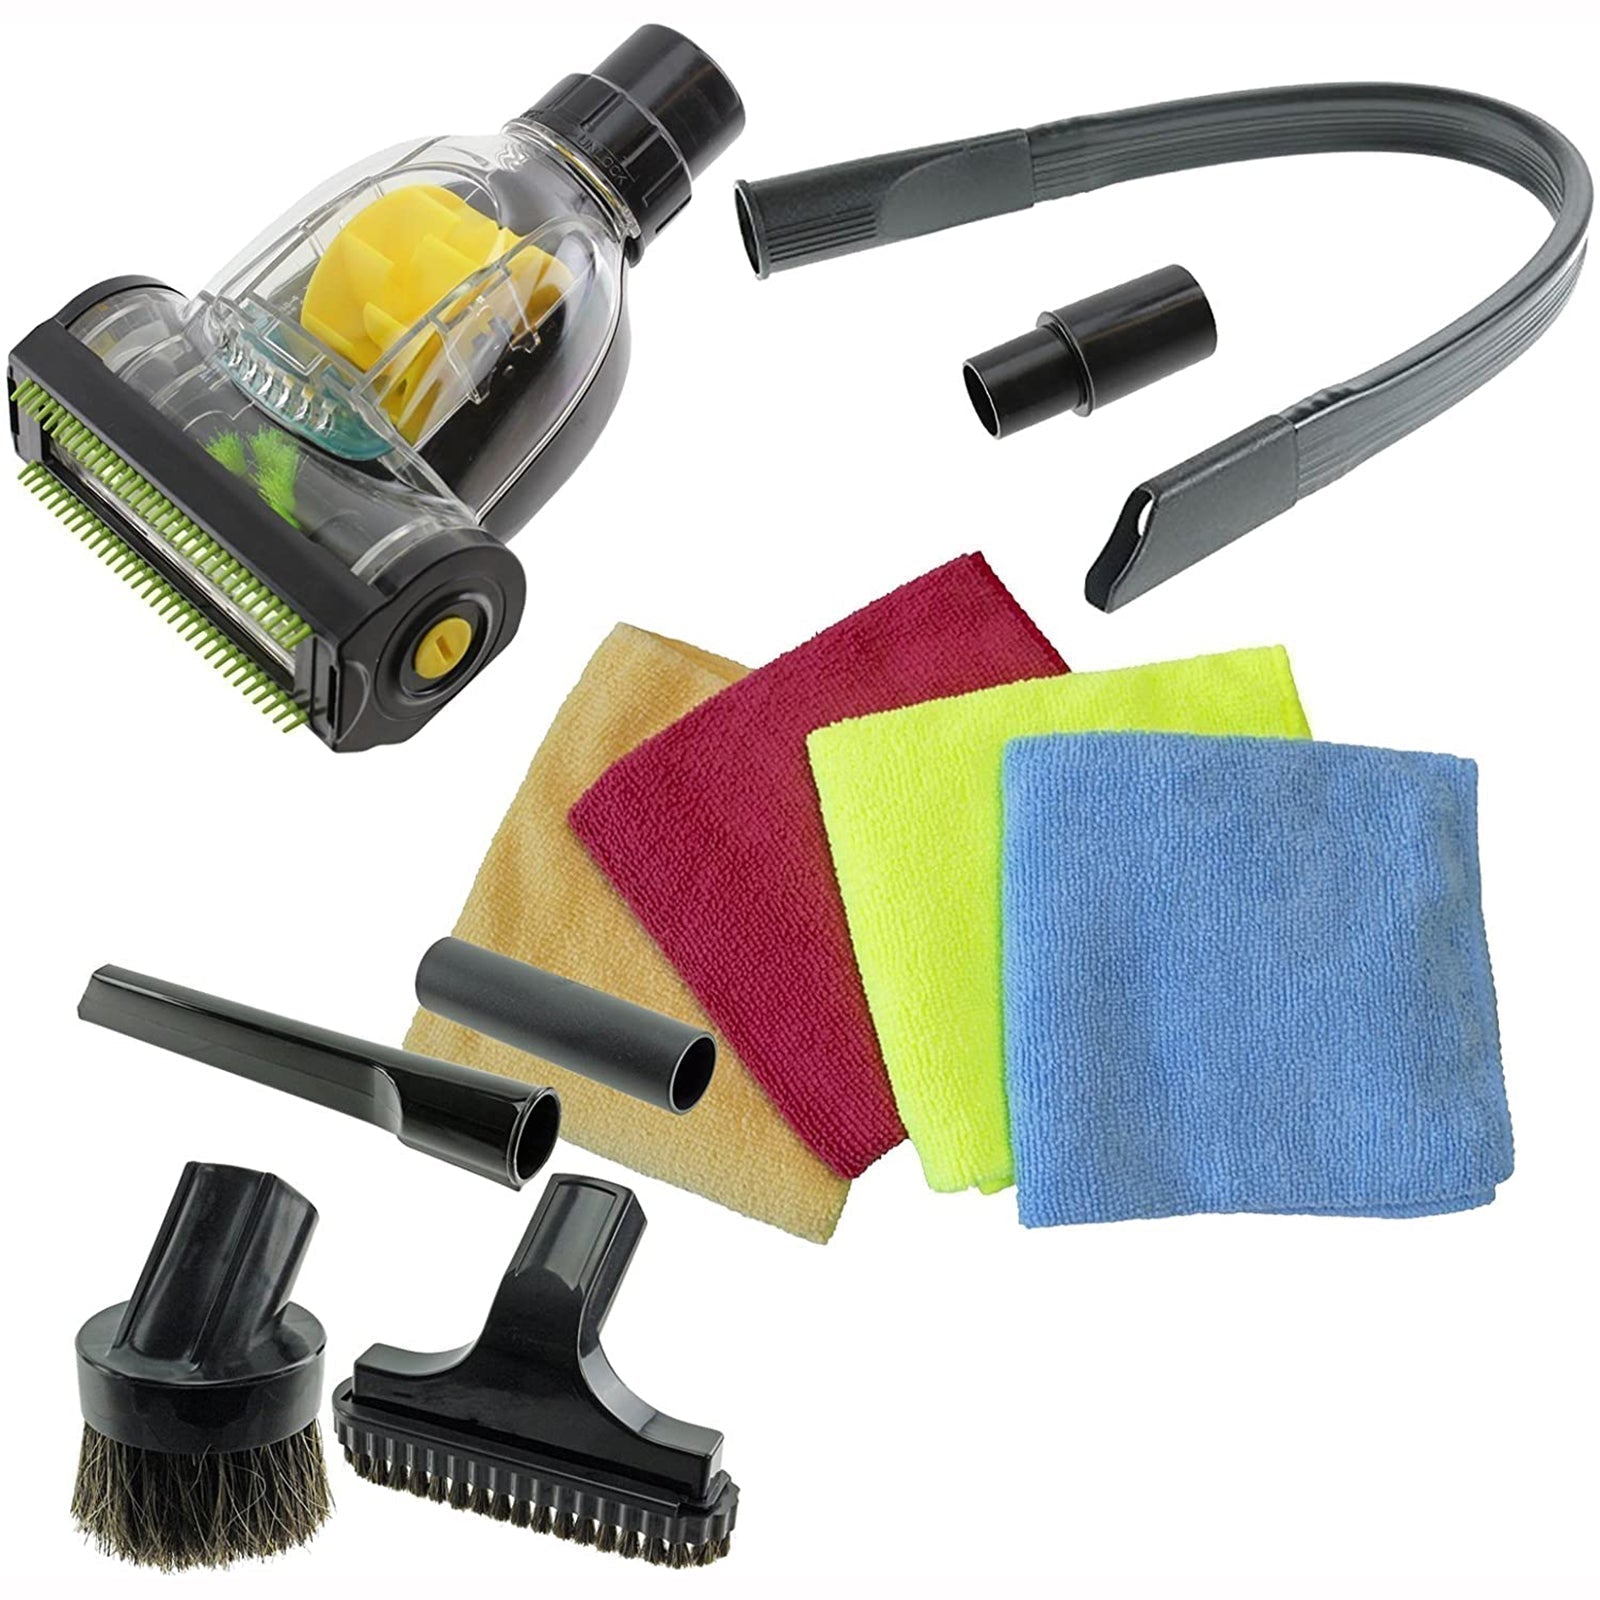 Car Valet Cleaning Tool Kit compatible with ZANUSSI Vacuum Cleaner (32mm/35mm)